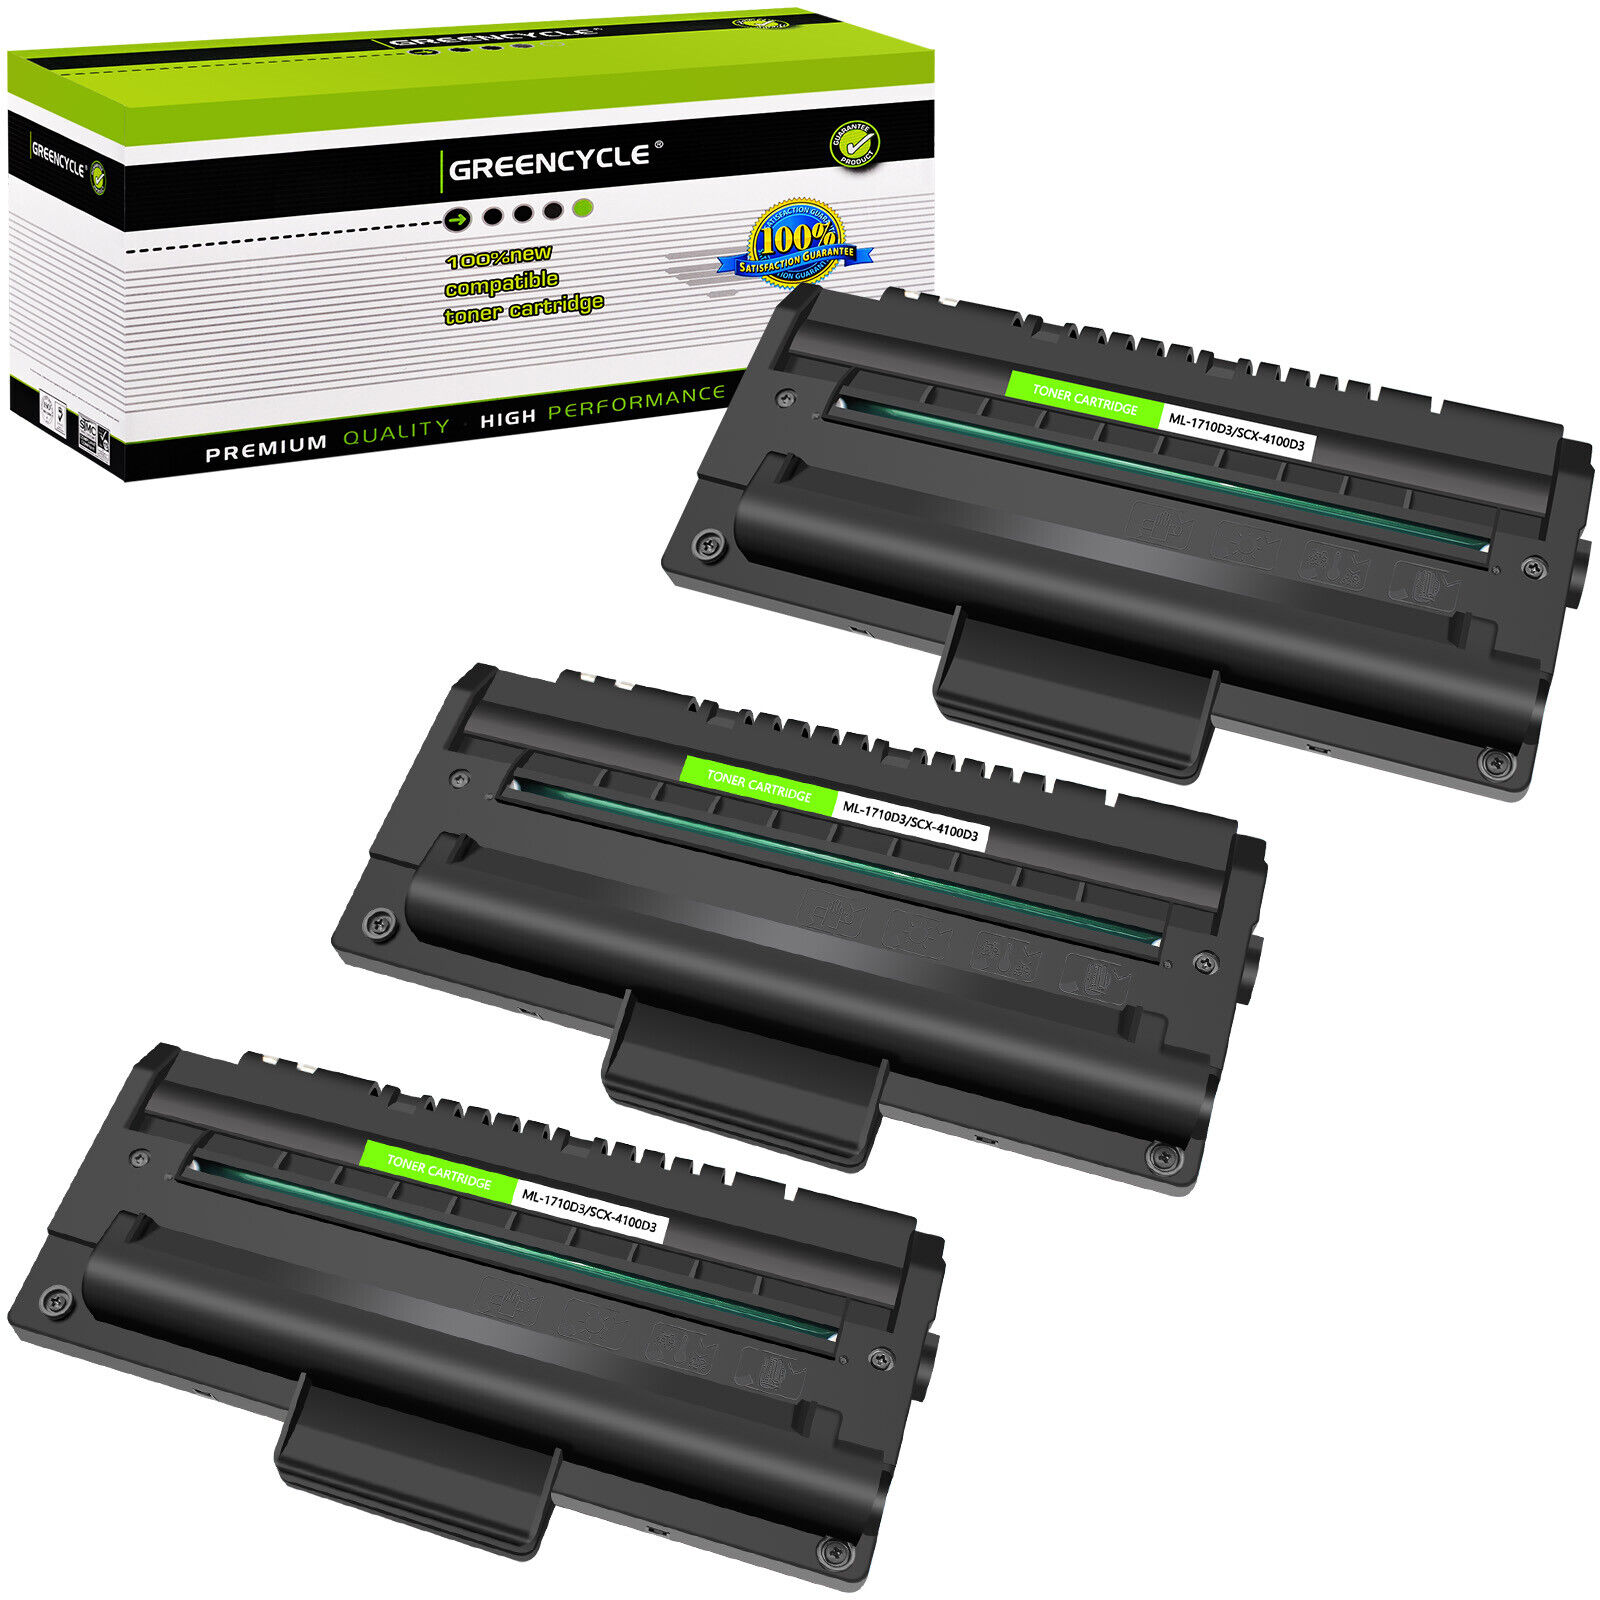 GREENCYCLE 3PK Toner Fits for Samsung SCX-4116 4216D3 4216 SF-560 SF-565P SF750